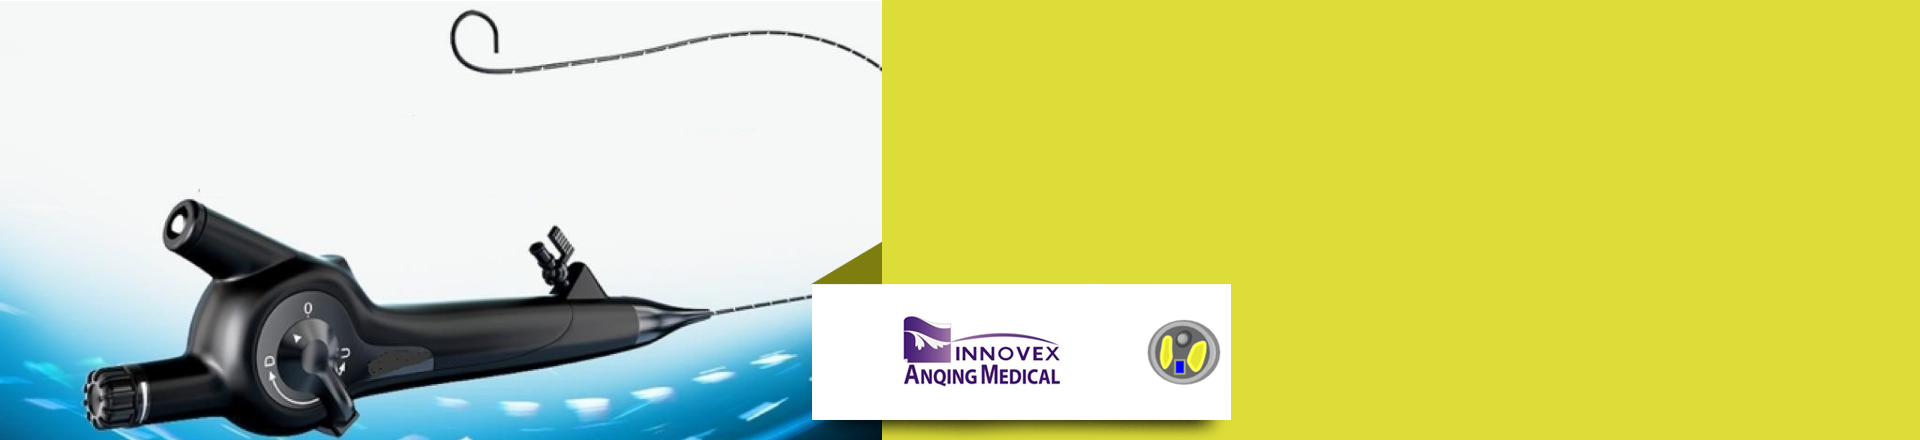 Innovex Anqing Medical